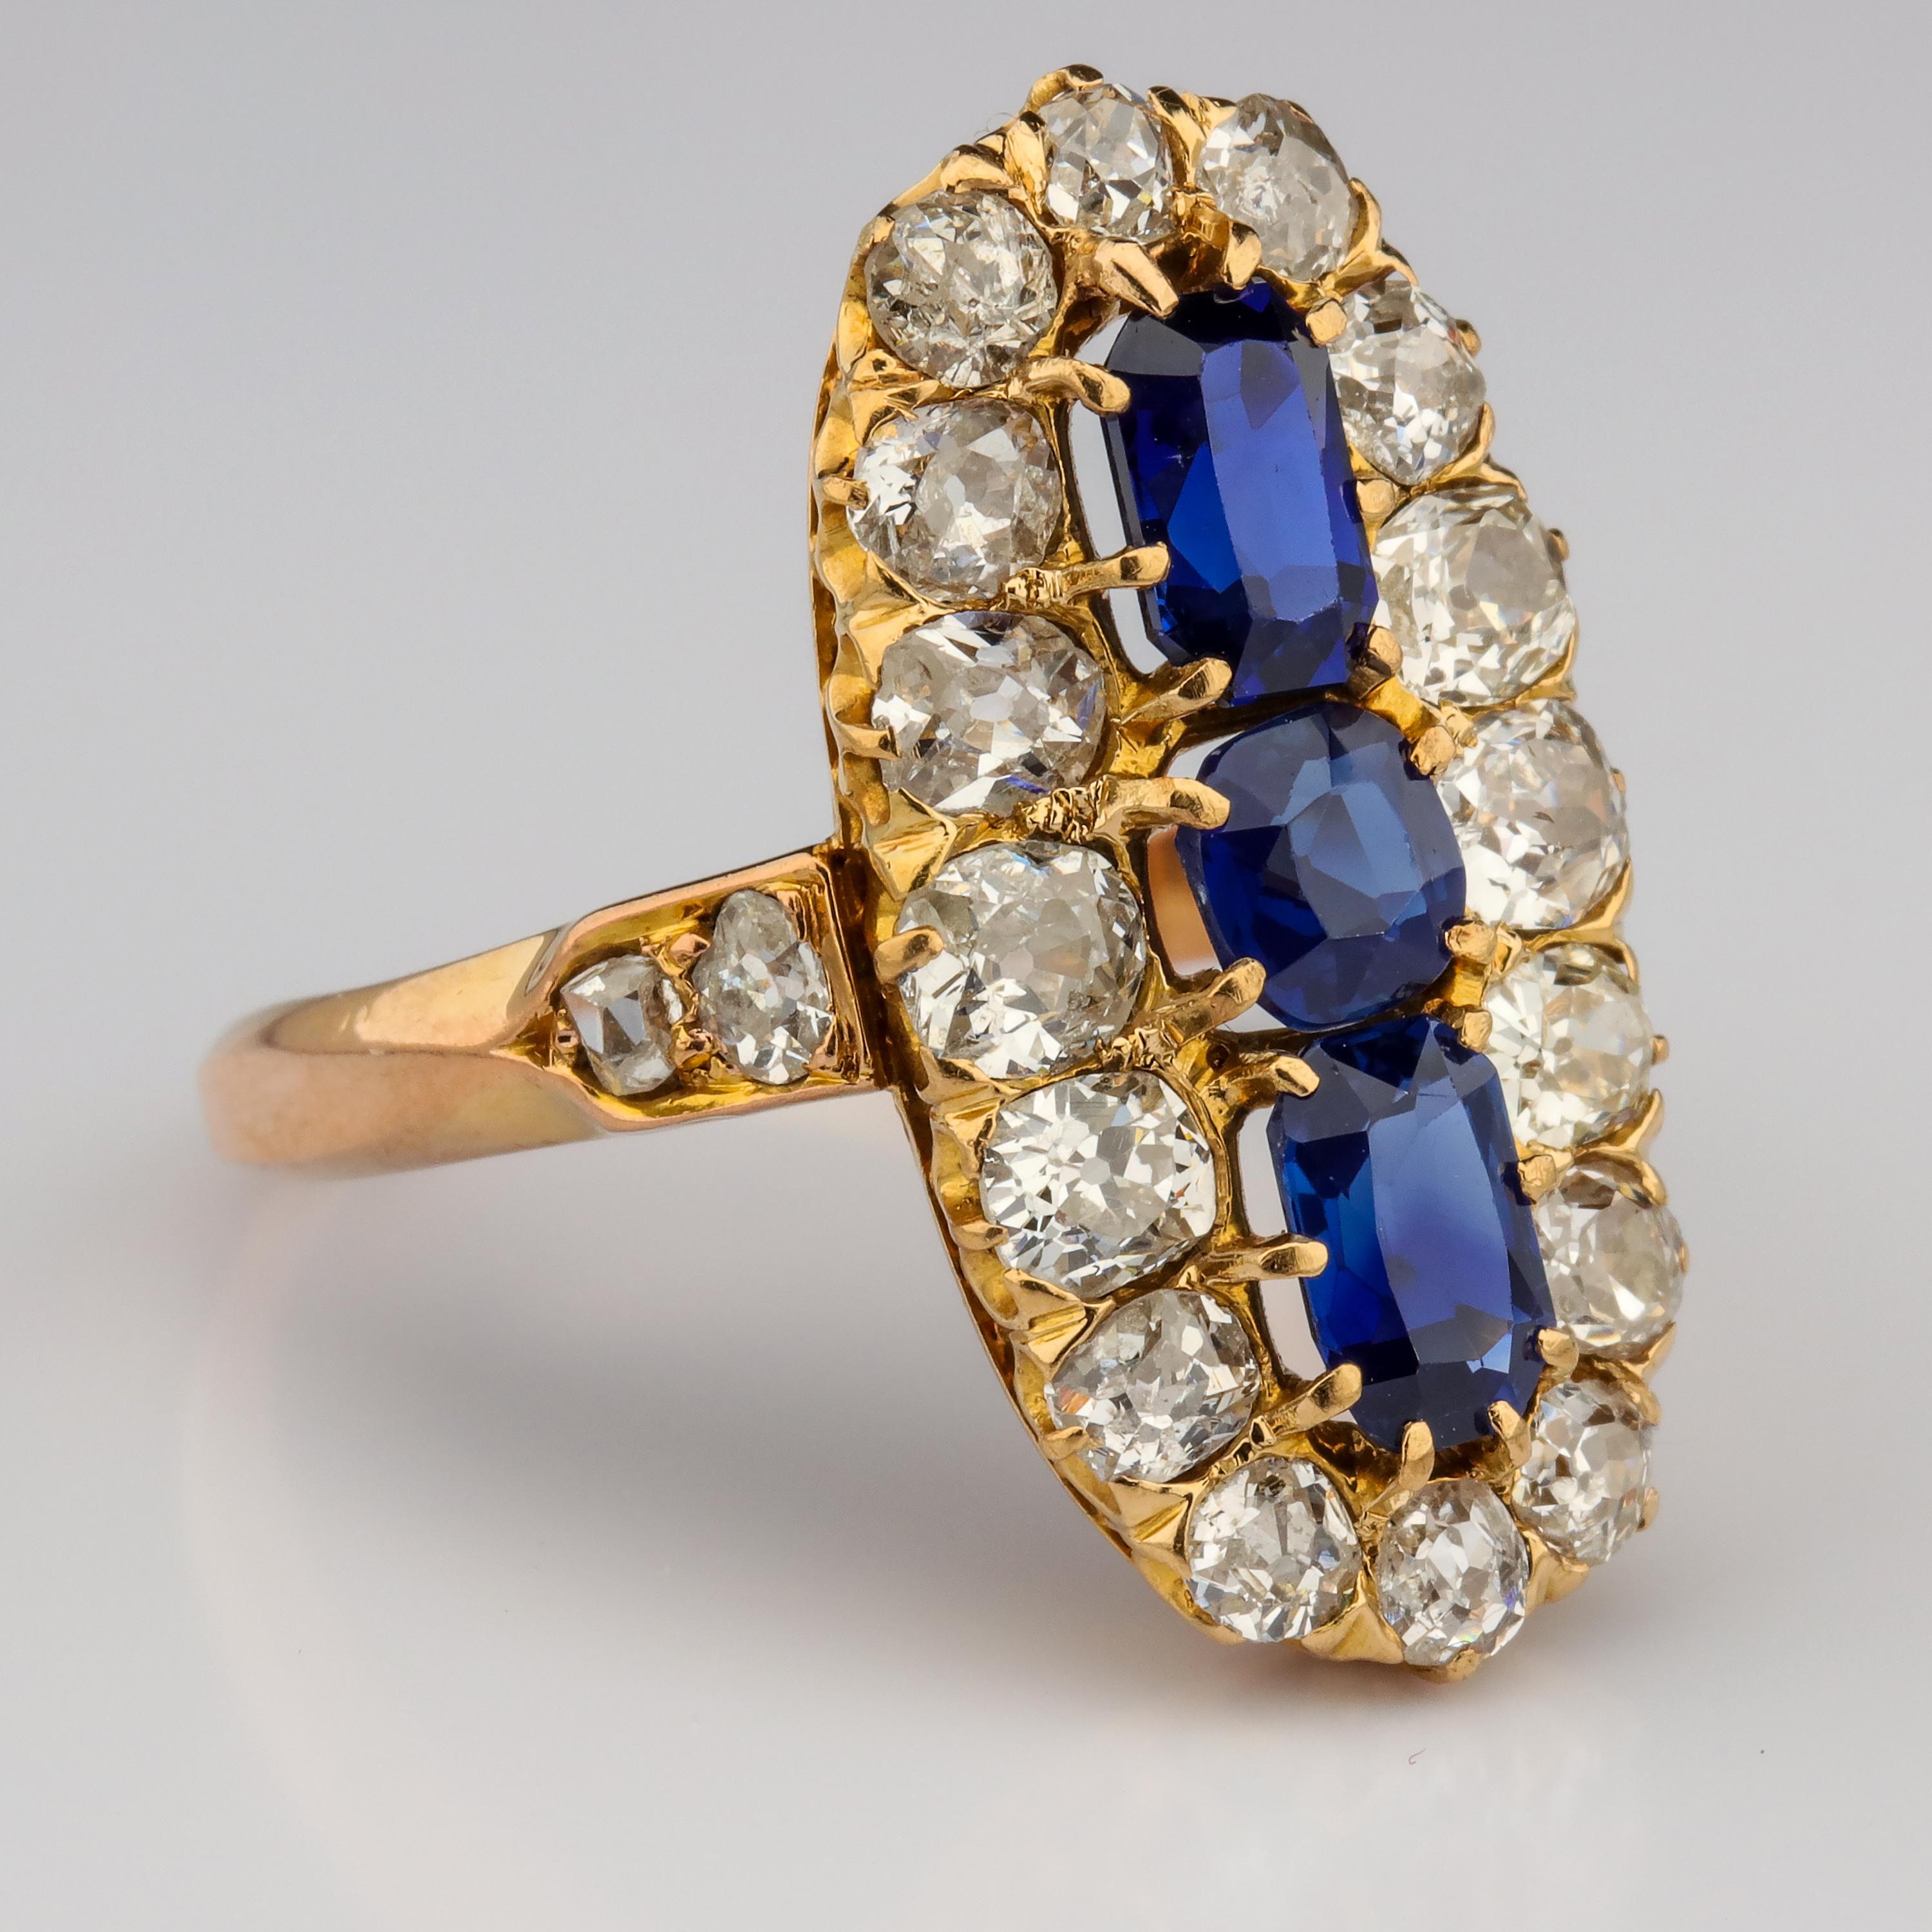 A line of one cushion and two octagonal mixed-cut GIA-certified no-heat sapphires totaling approximately 2.26 carats stand out in vivid, royal-blue relief against a surround sixteen of near-colorless round, oval and cushion-cut old-mine diamonds